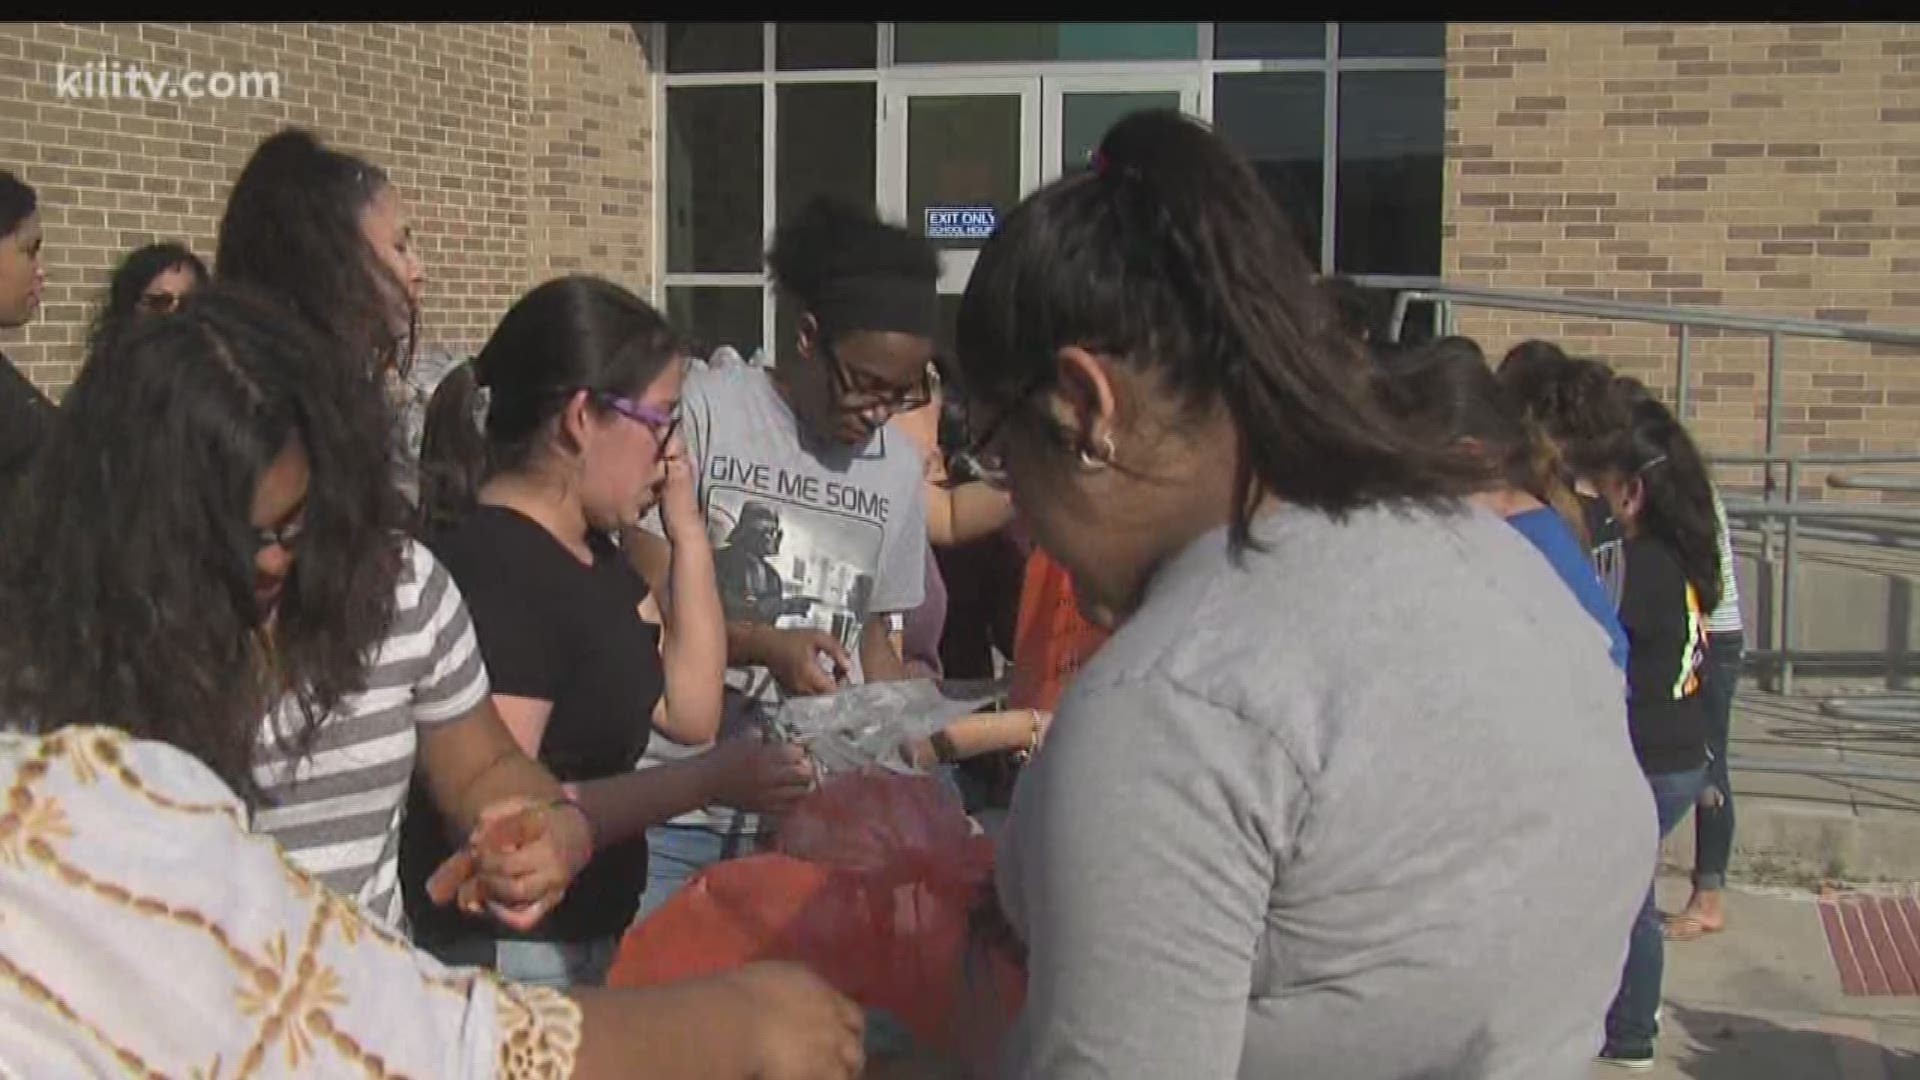 The event was held in partnership with the Coastal Bend Food Bank and Moody High School, and they hope to host one every month.